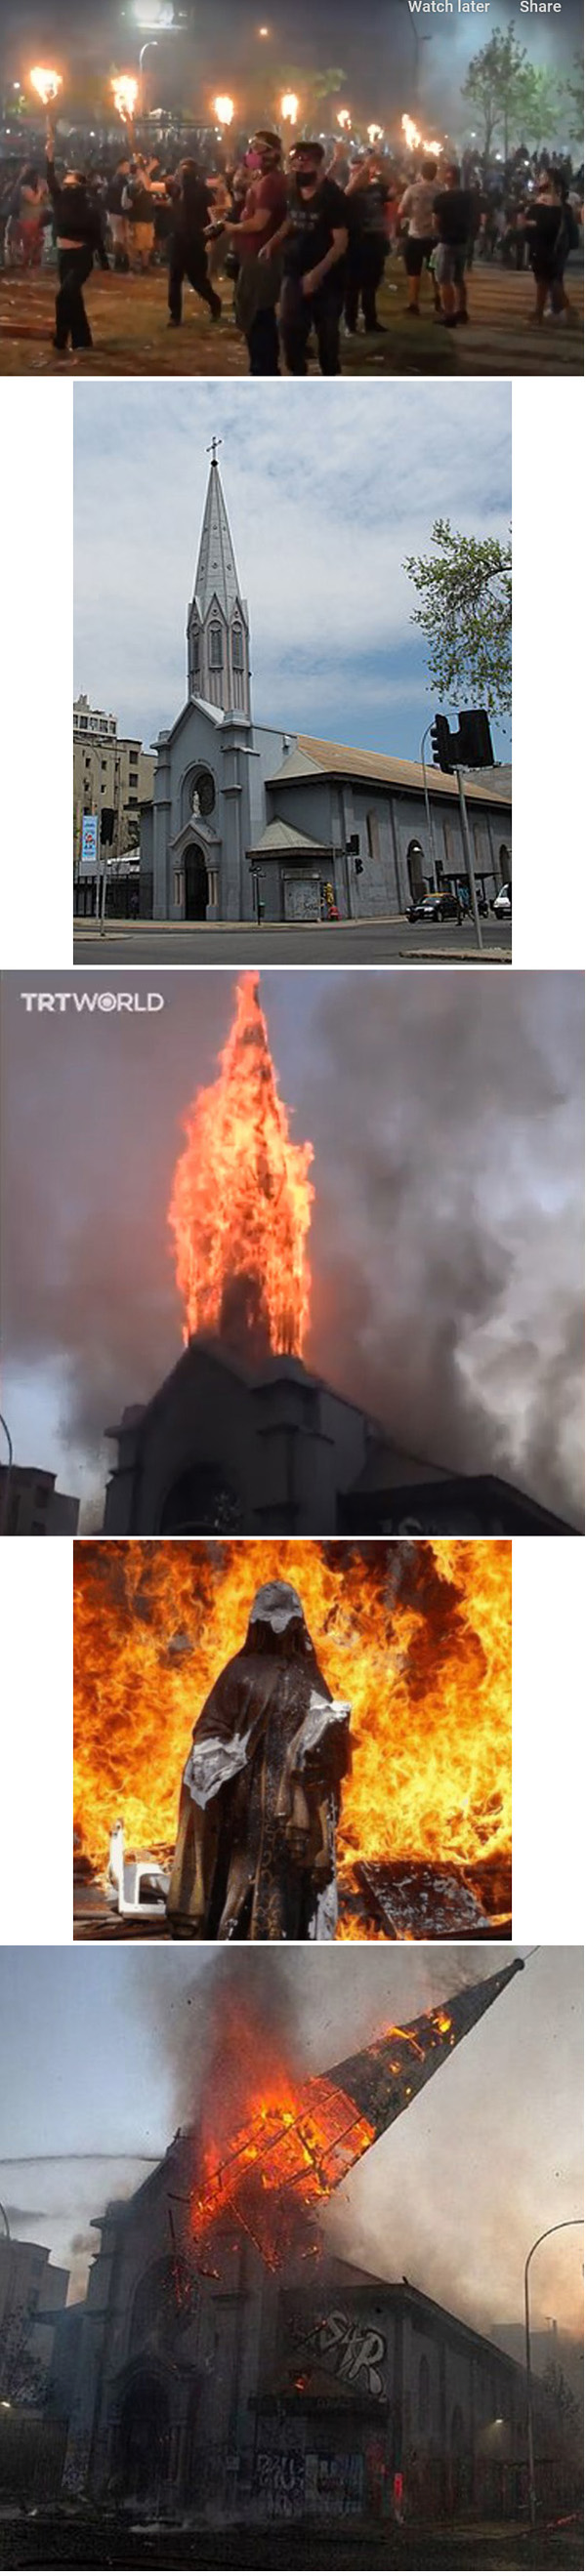 Burning churches in Chile 2